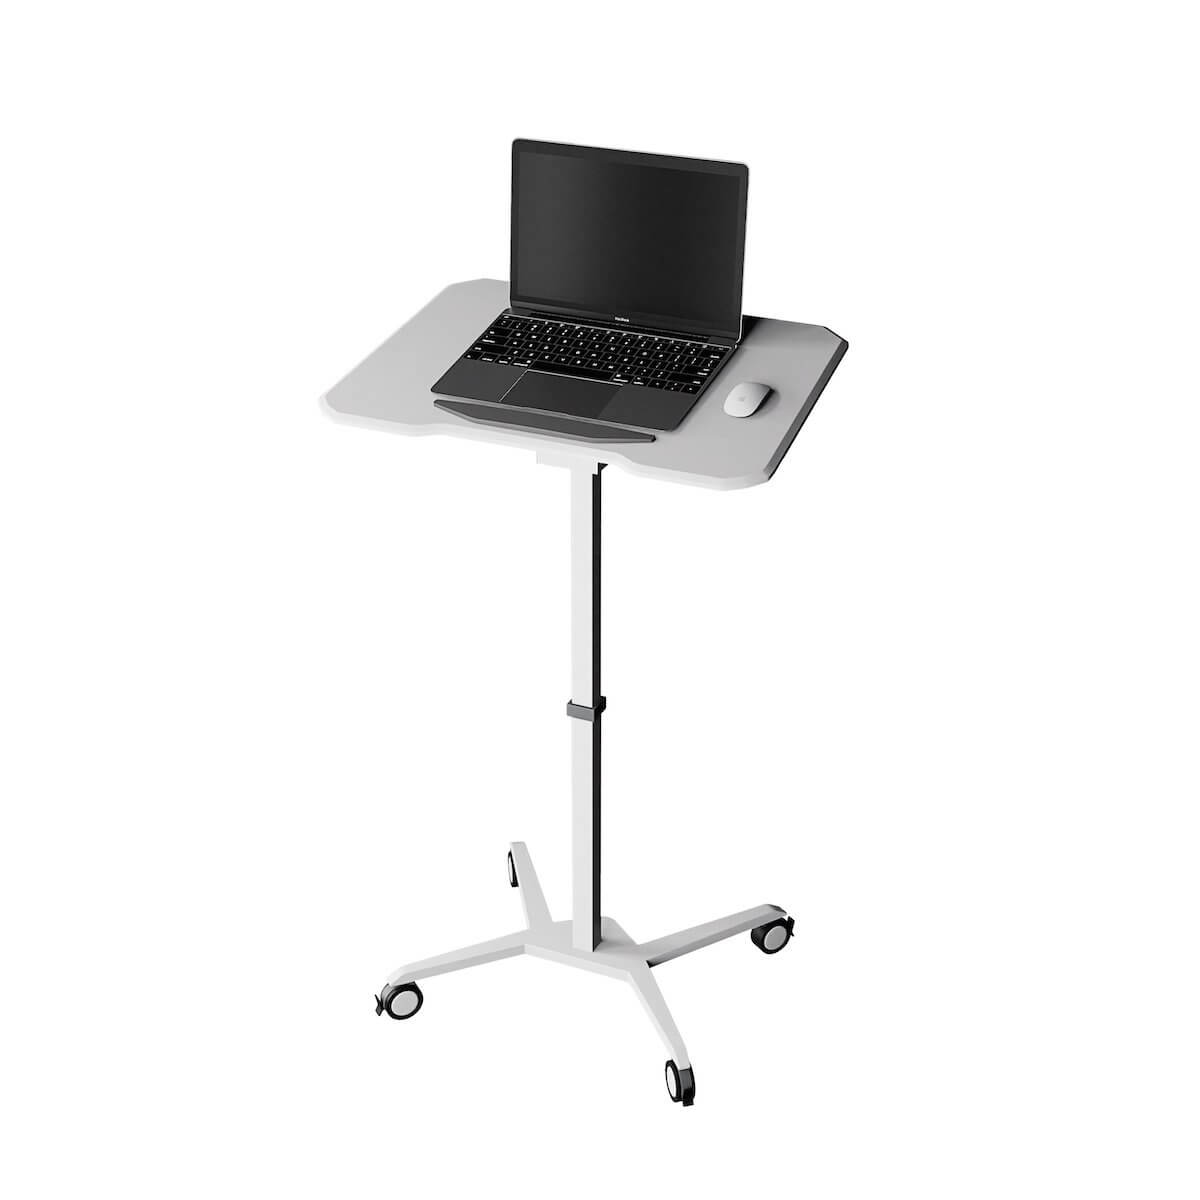 Techni Mobili White Sit to Stand Mobile Laptop Computer Stand with Height Adjustable and Tiltable Tabletop RTA-B008-WHT With Laptop